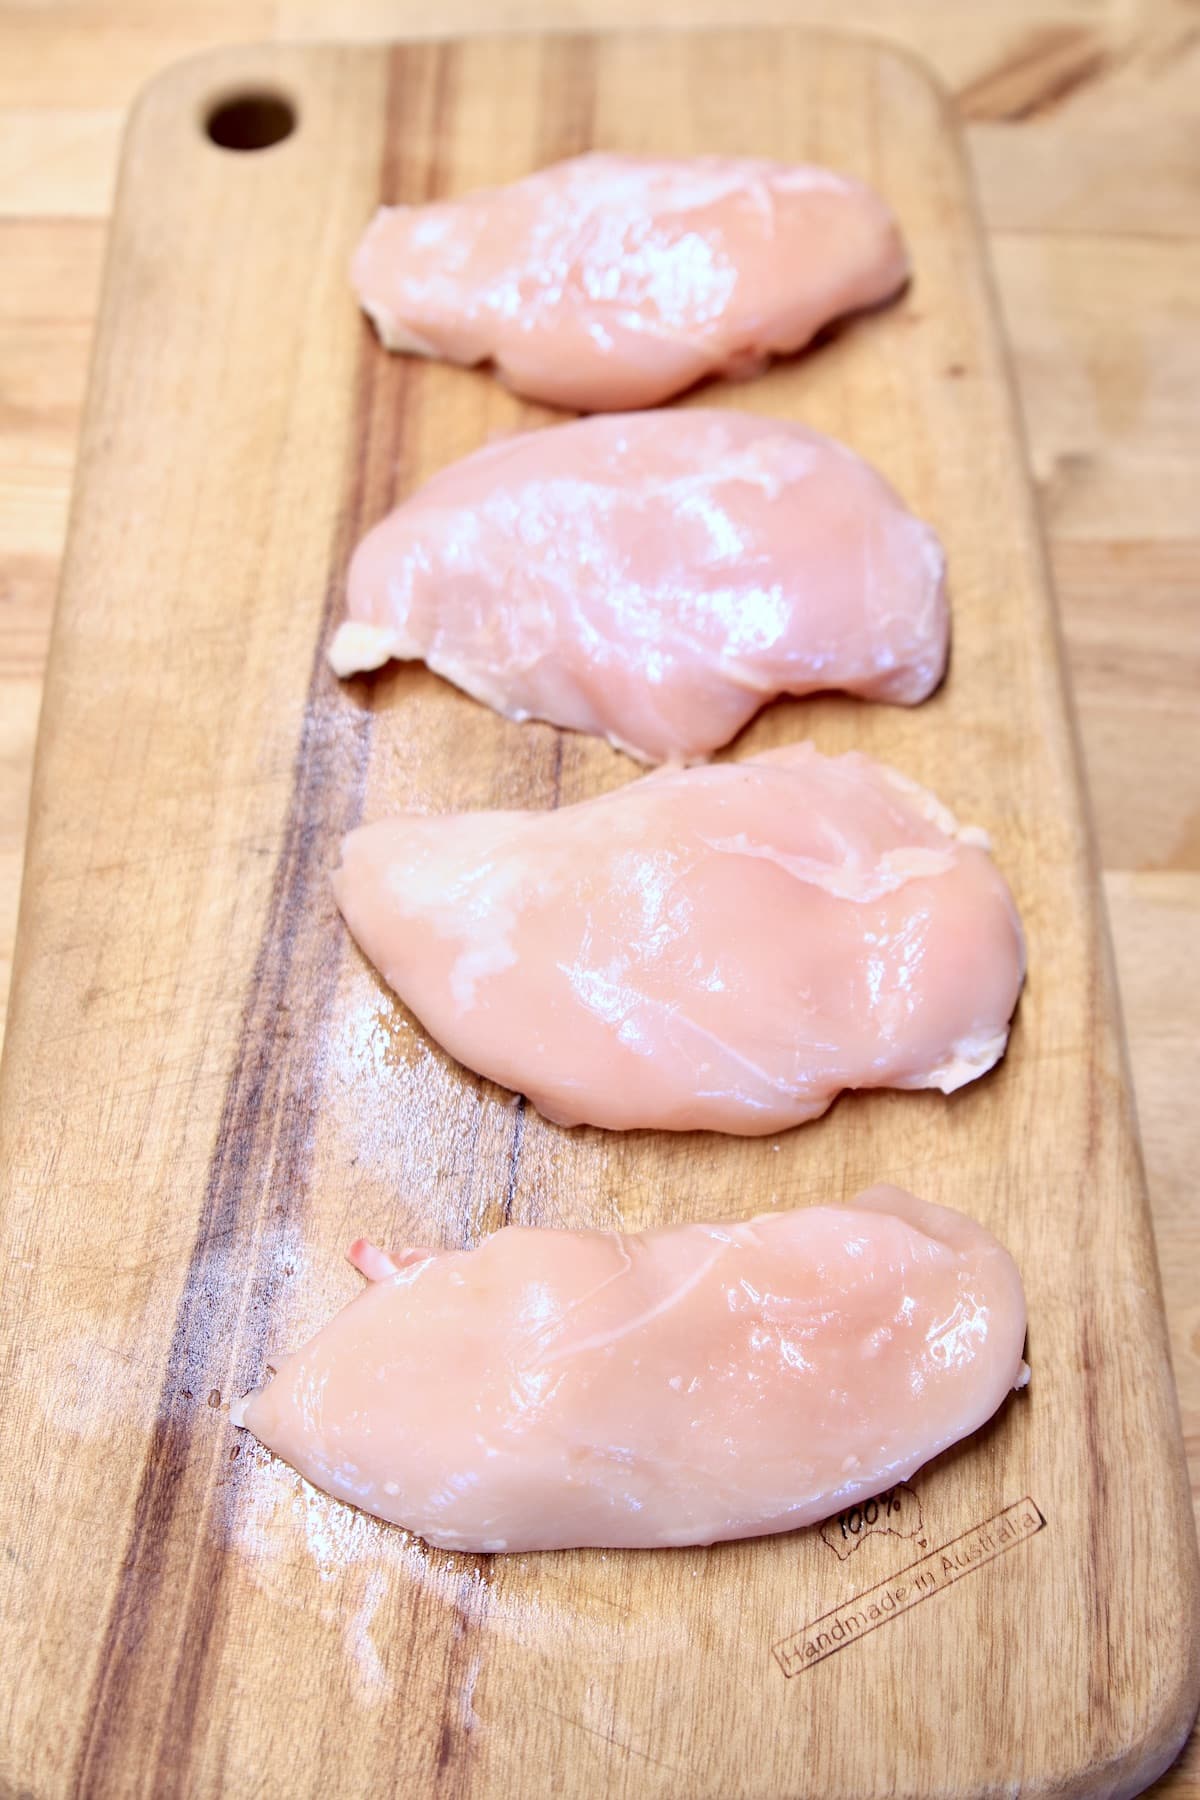 Chicken breasts on a cutting board.